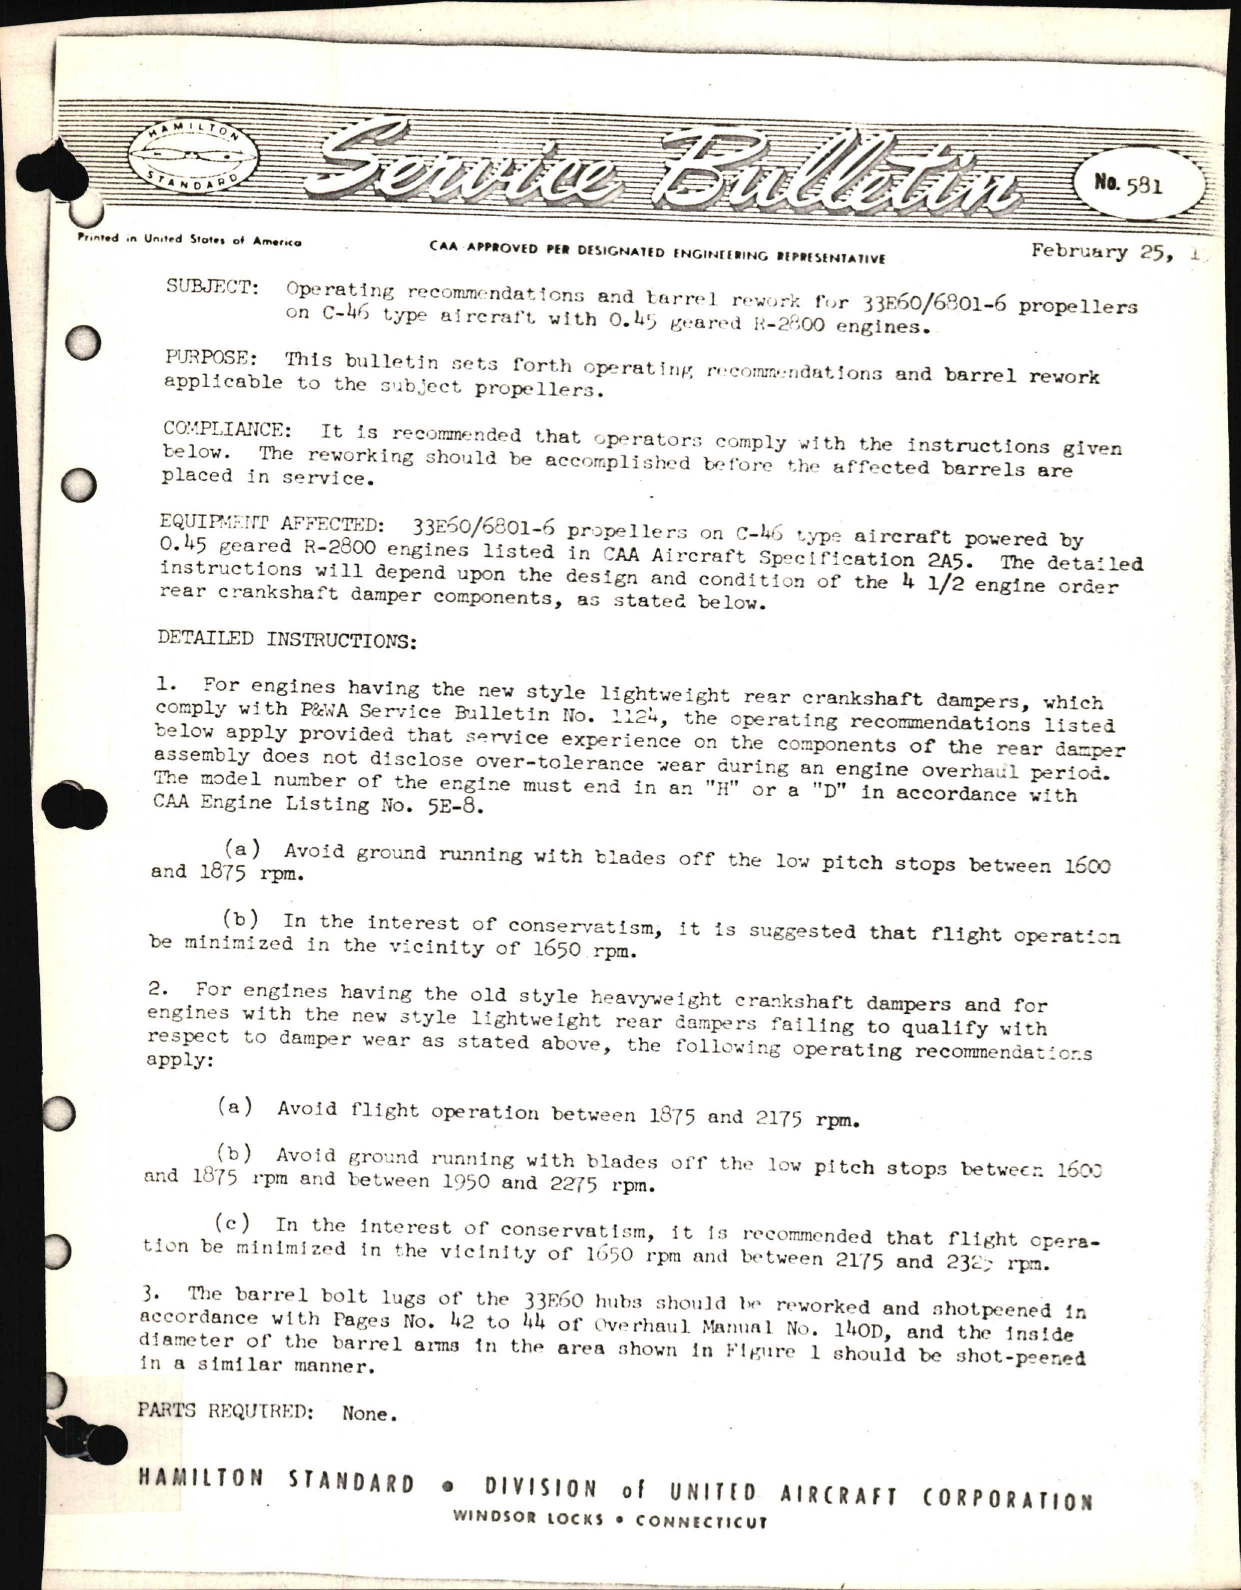 Sample page 1 from AirCorps Library document: Operating Recommendations and Barrel Rework for 33E60/6801-6 